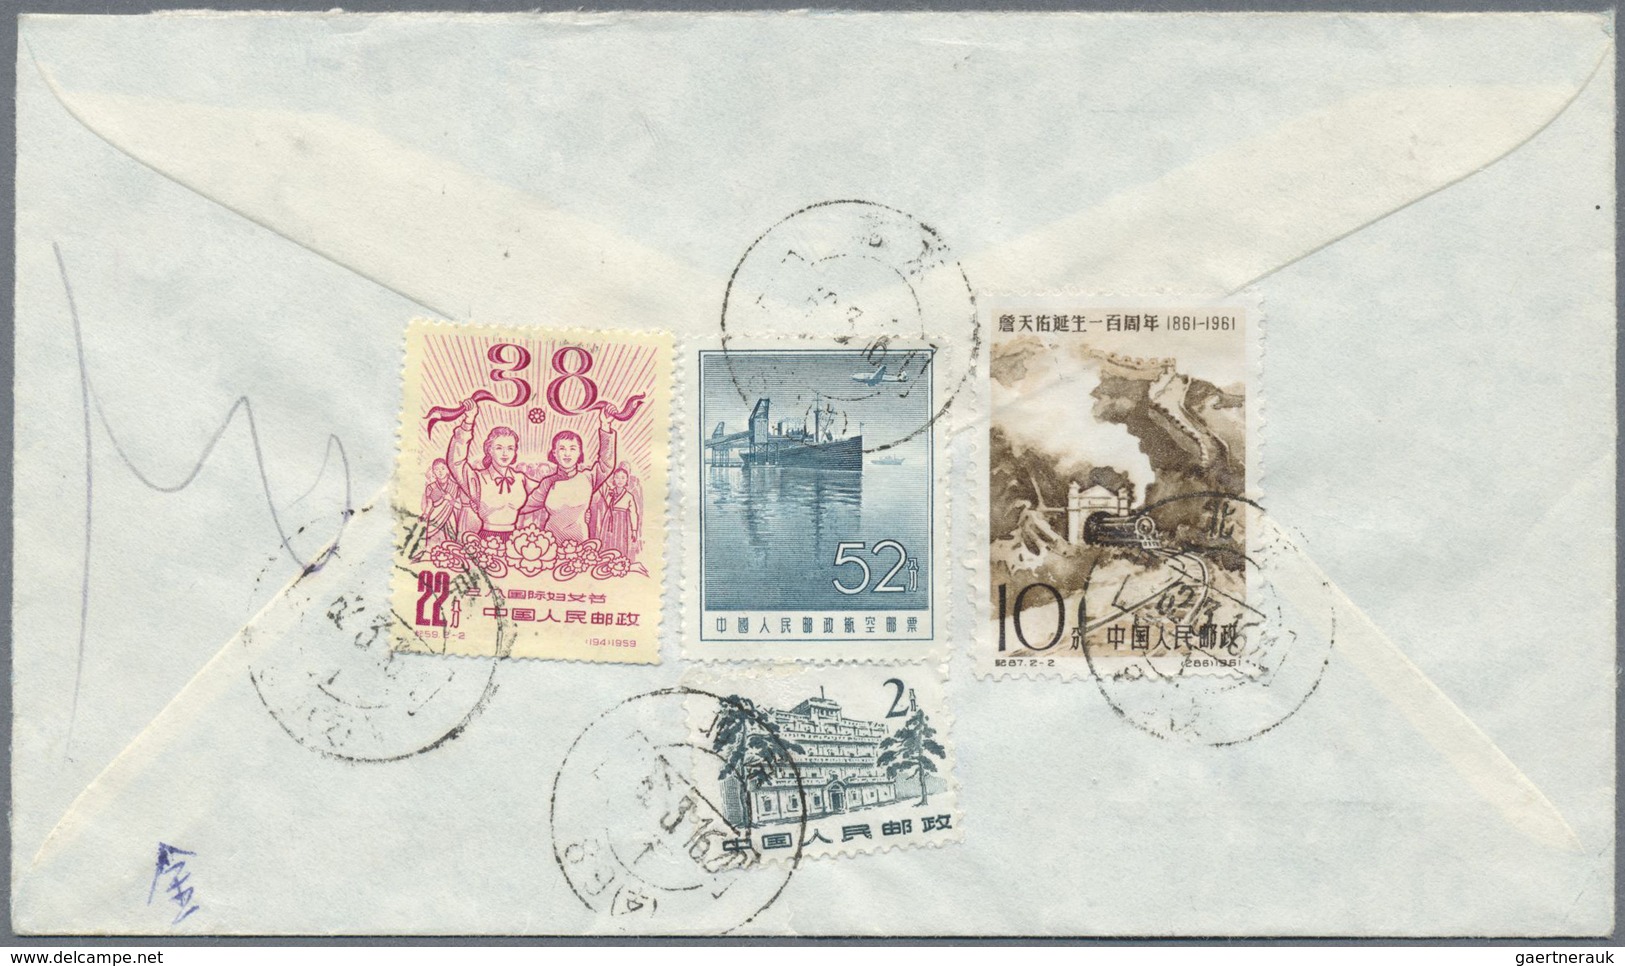 Br China - Volksrepublik: 1950/62, airmail covers (7), six to Switzerland and one to Denmark.